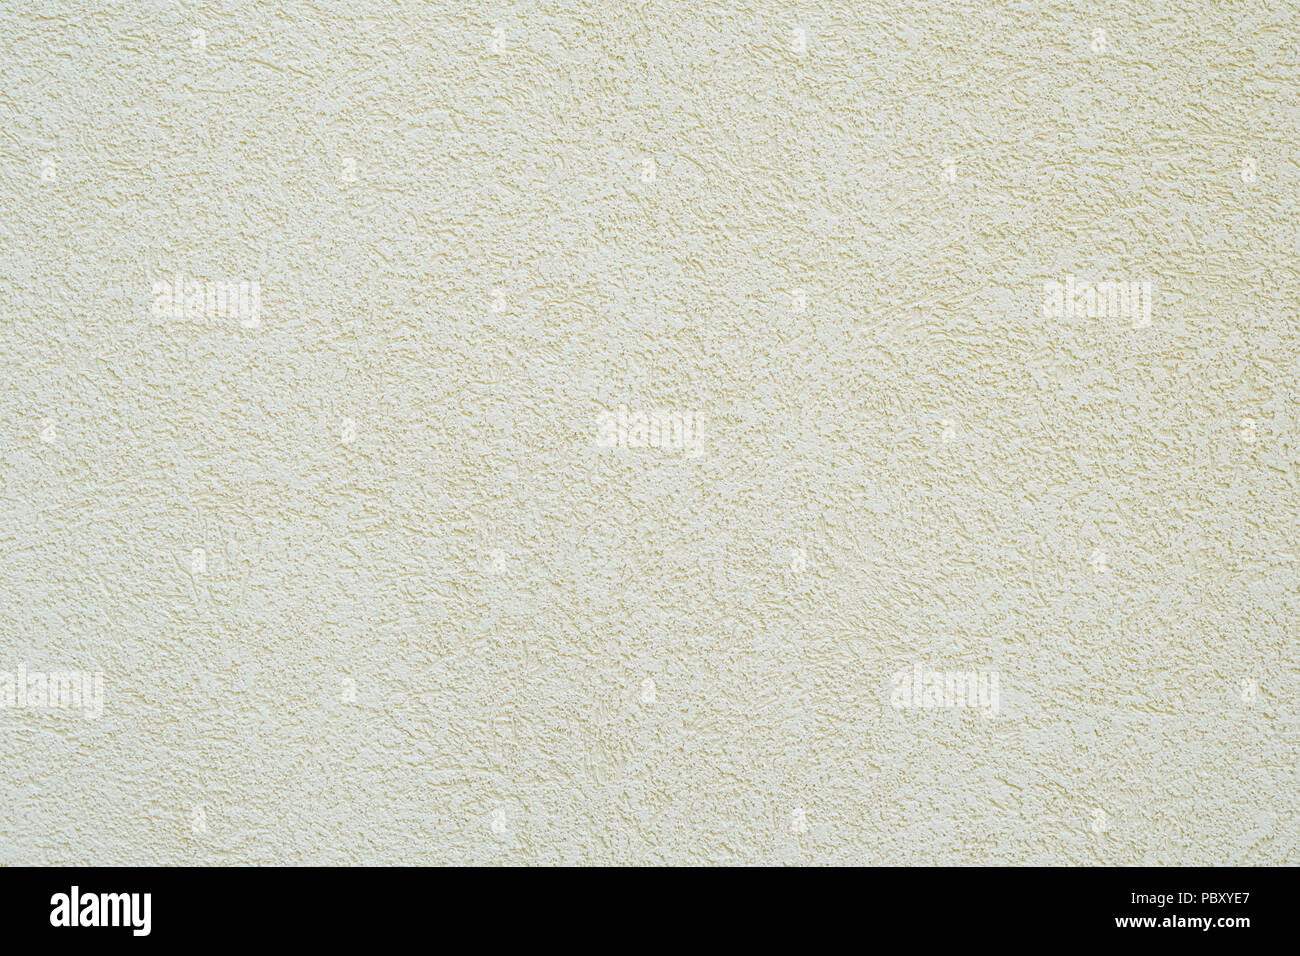 background wall with off-white or pale yellow roughcast plaster texture Stock Photo